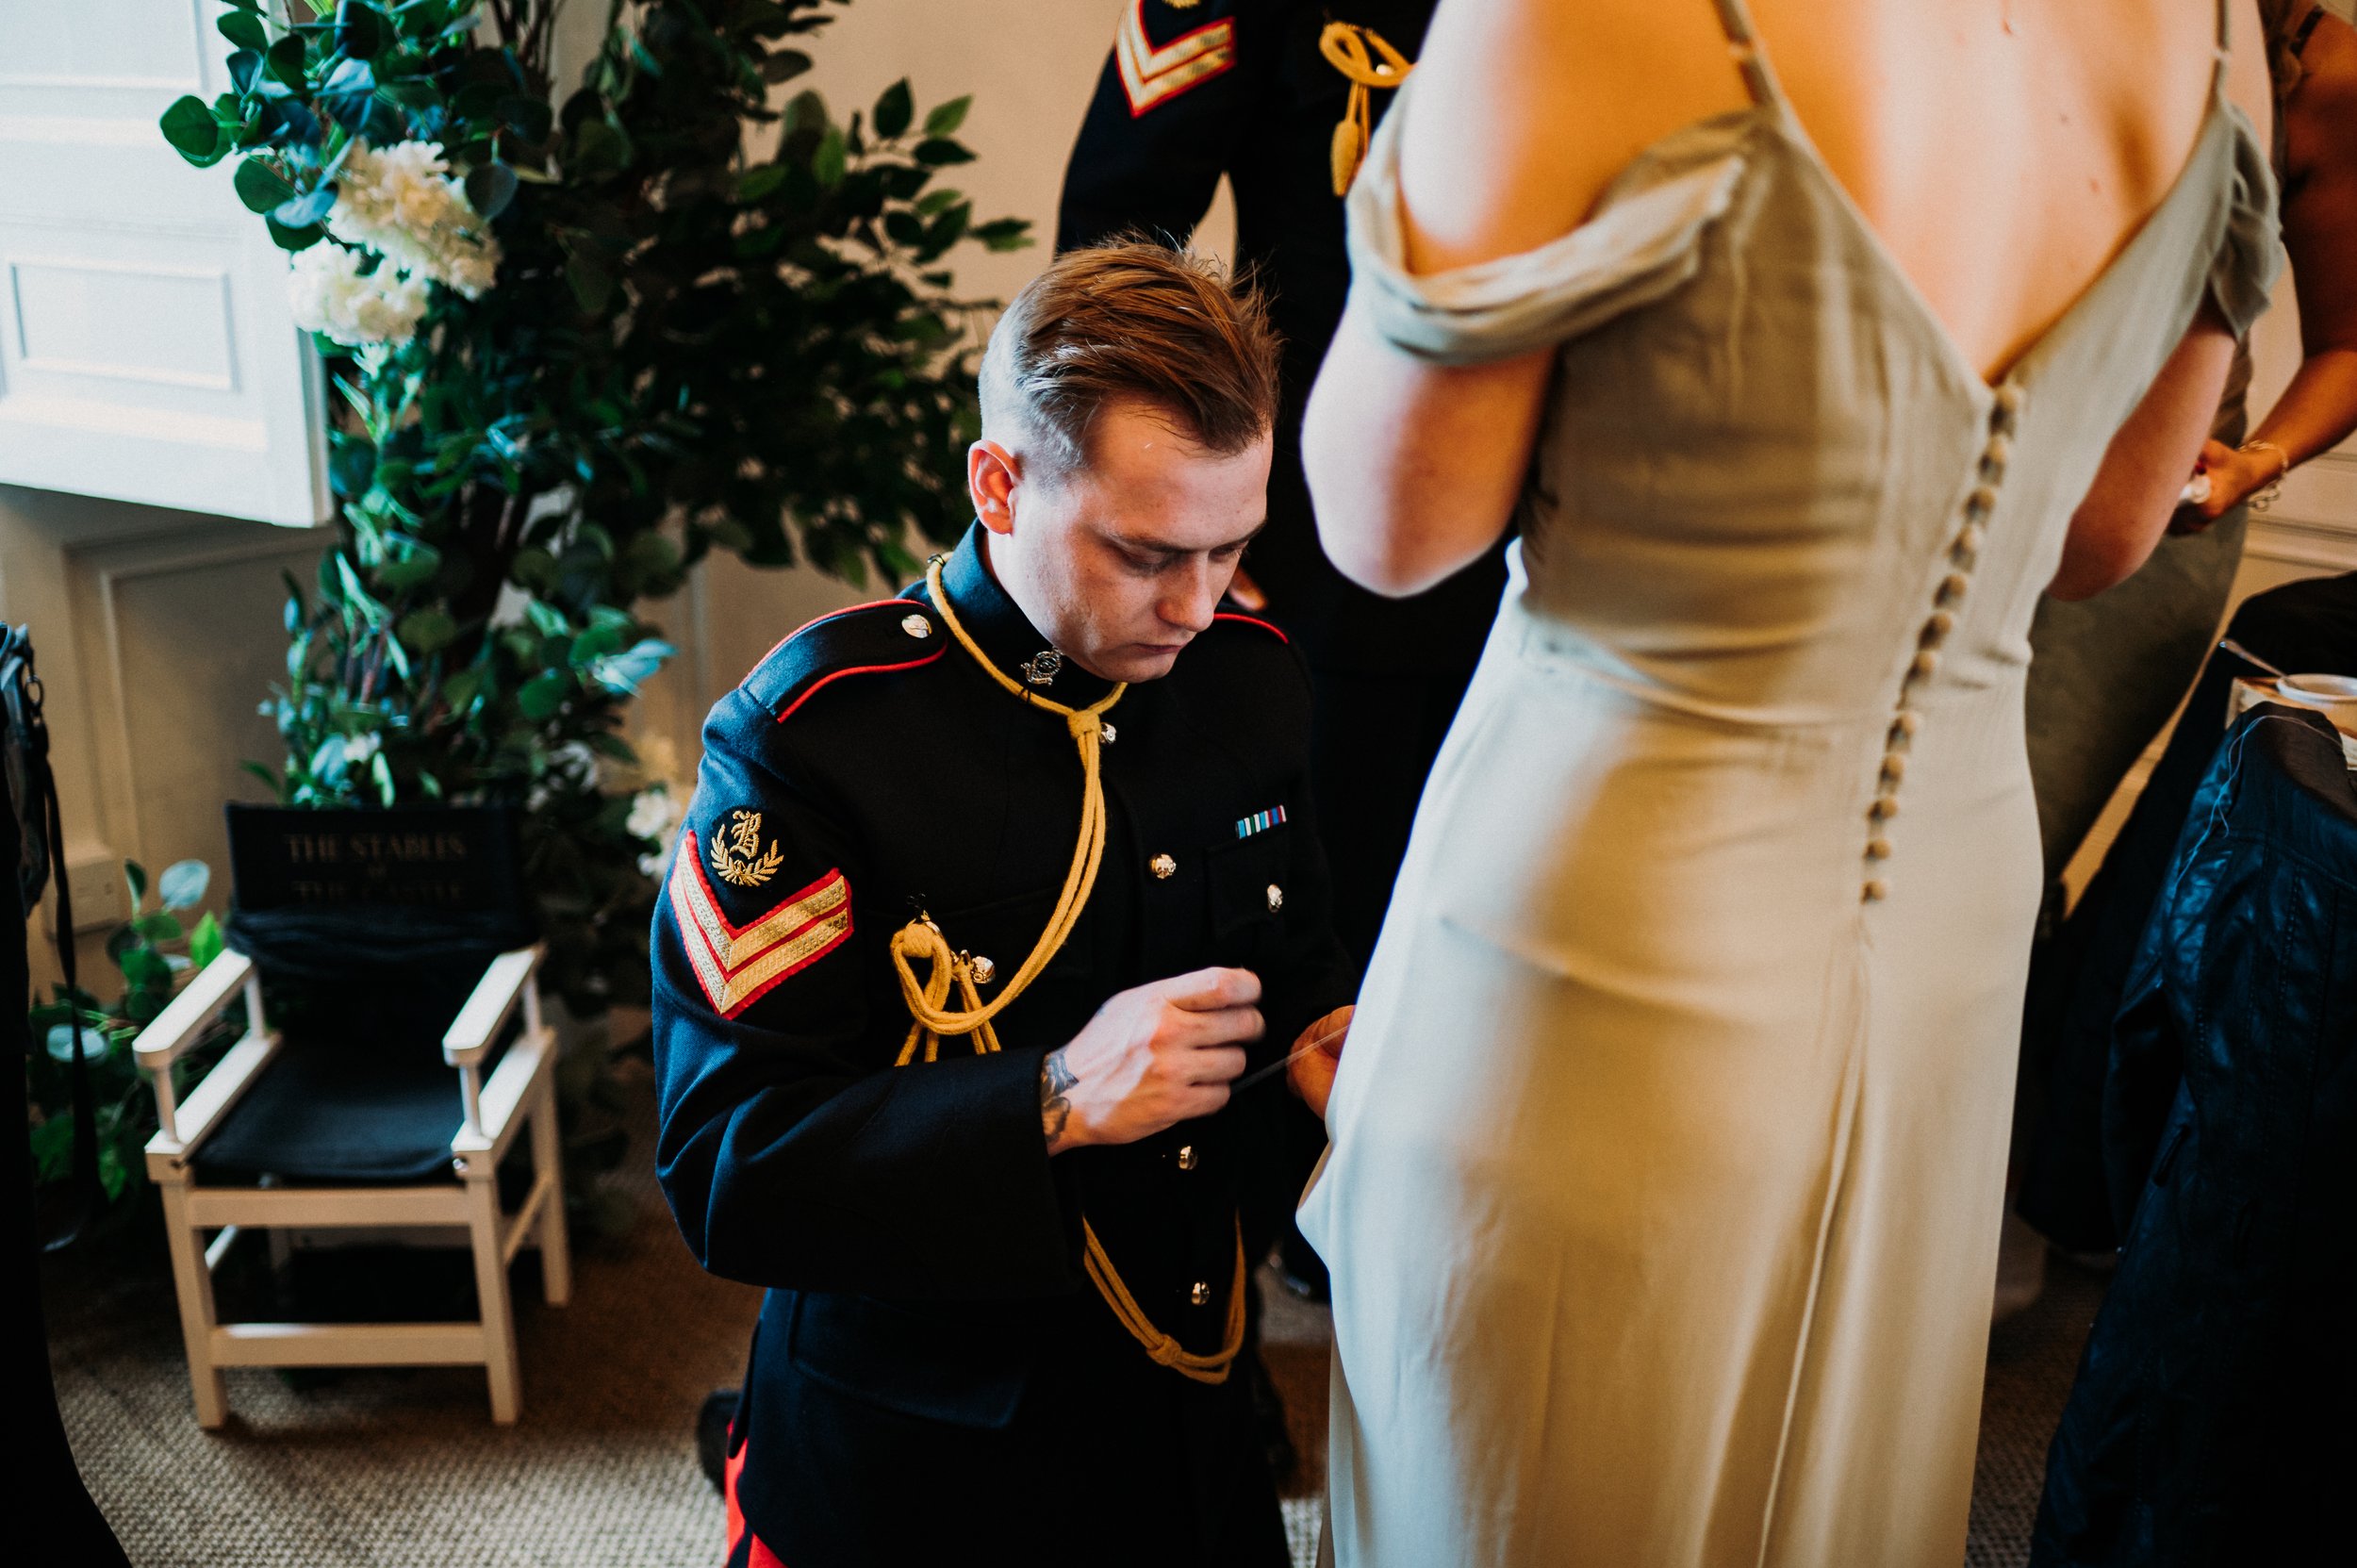 A soldier and master tailor in full uniform helps a bridesmaid with her dress by putting a few stitches in.